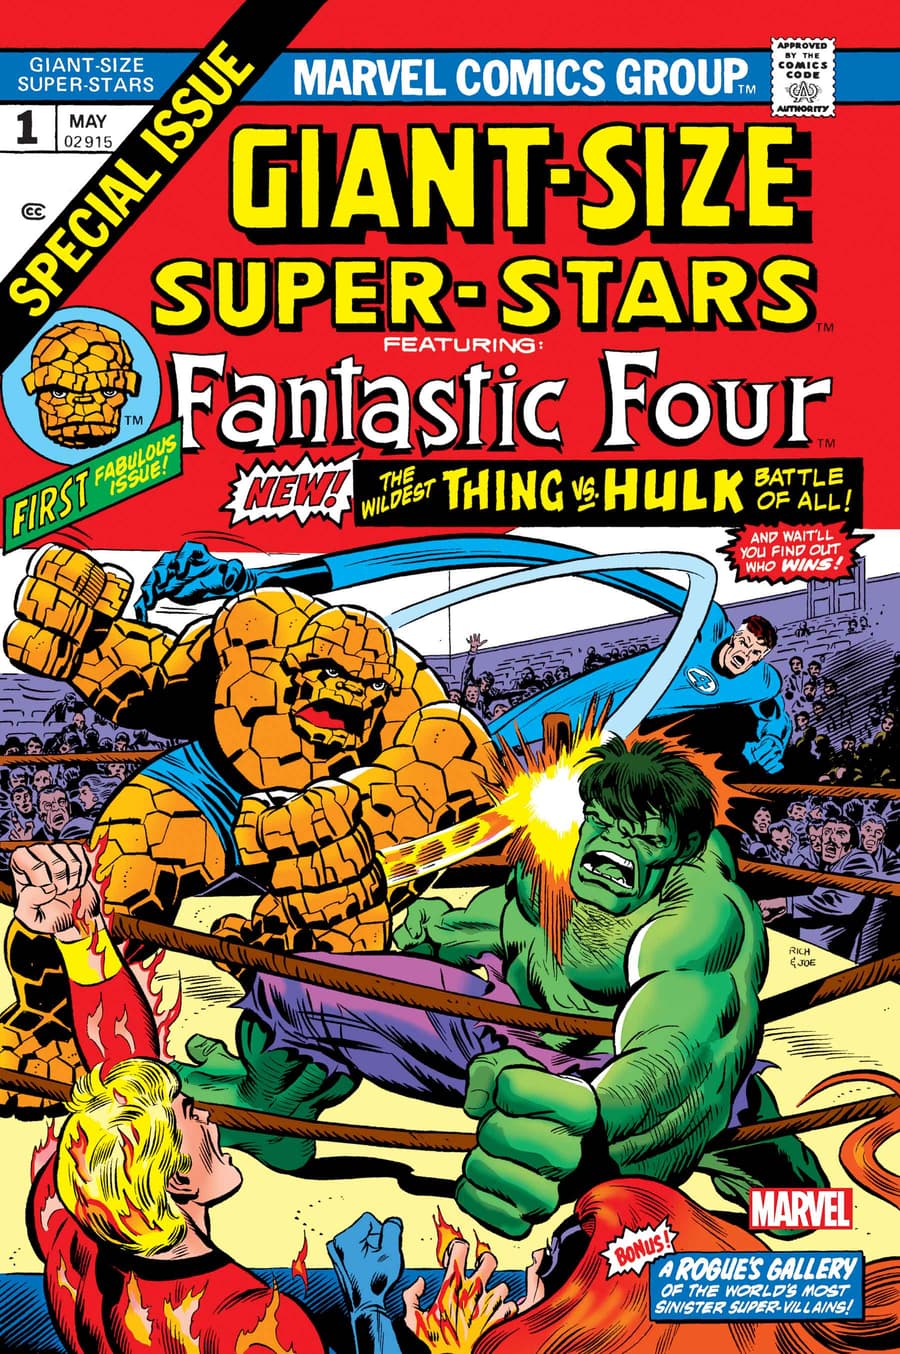 GIANT-SIZE SUPER-STARS #1 FACSIMILE EDITION cover by Rich Buckler